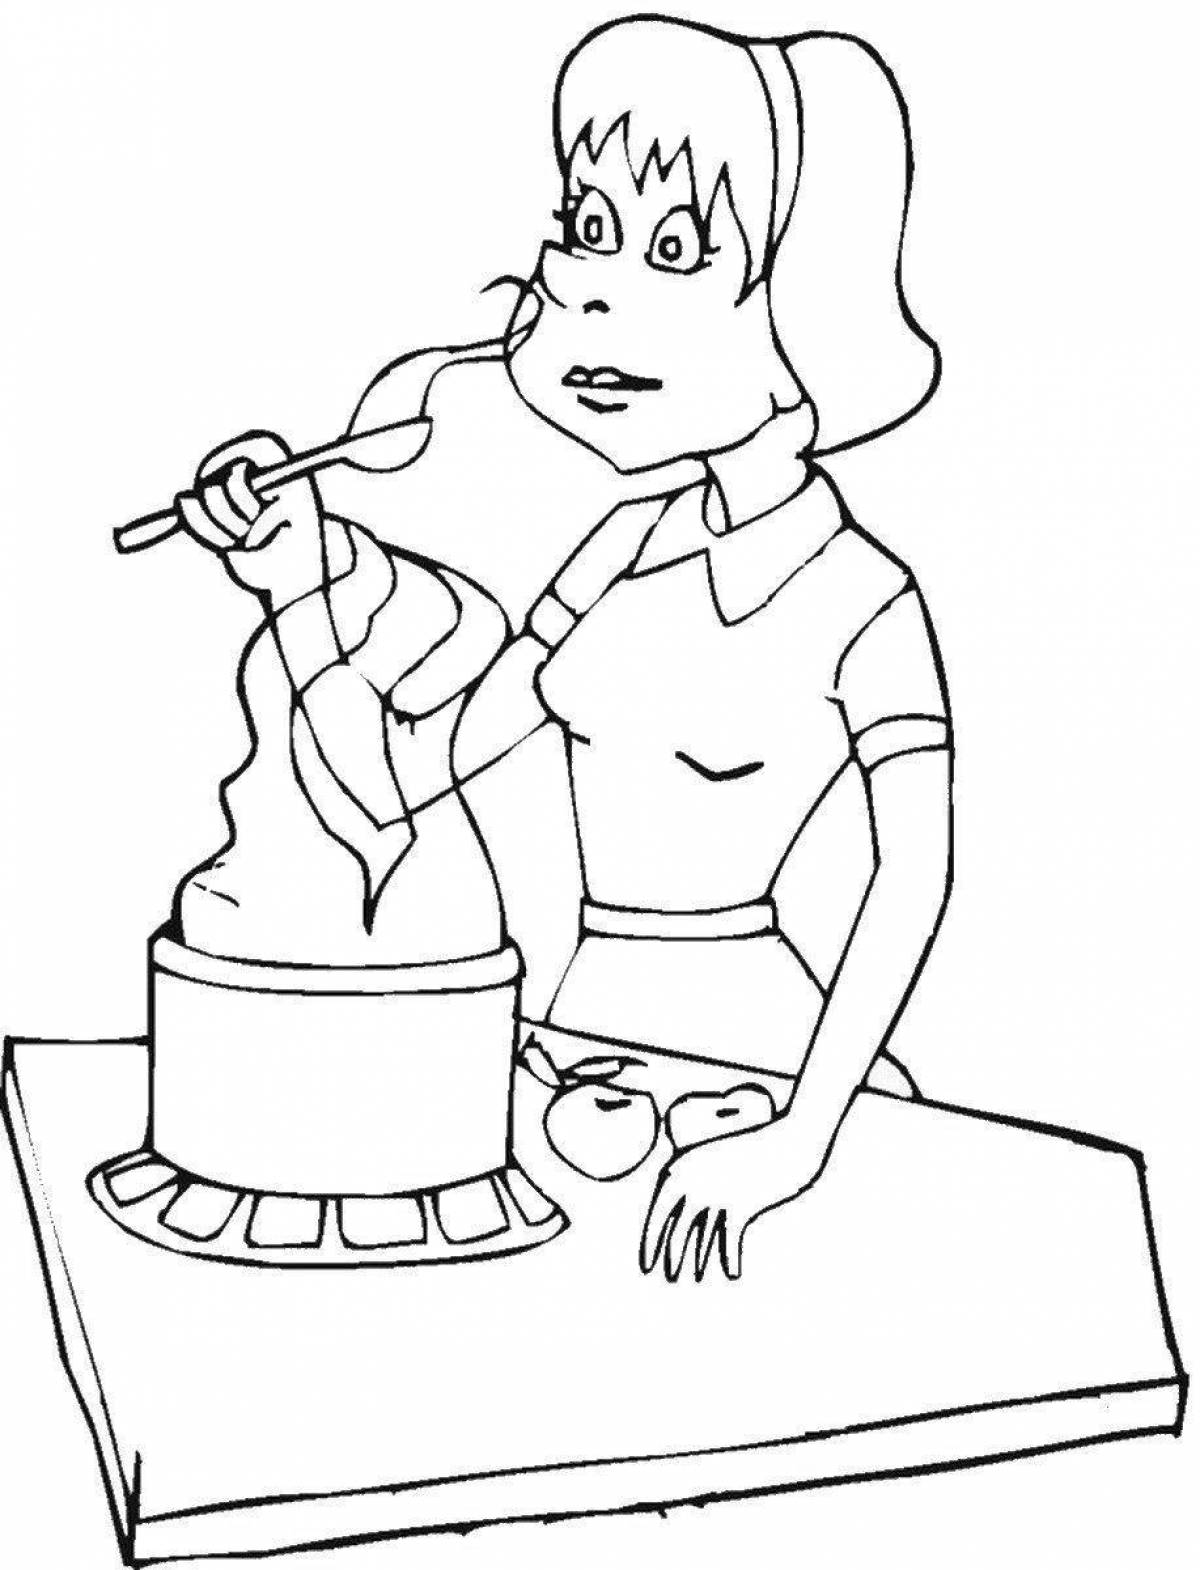 Coloring page magical housewife